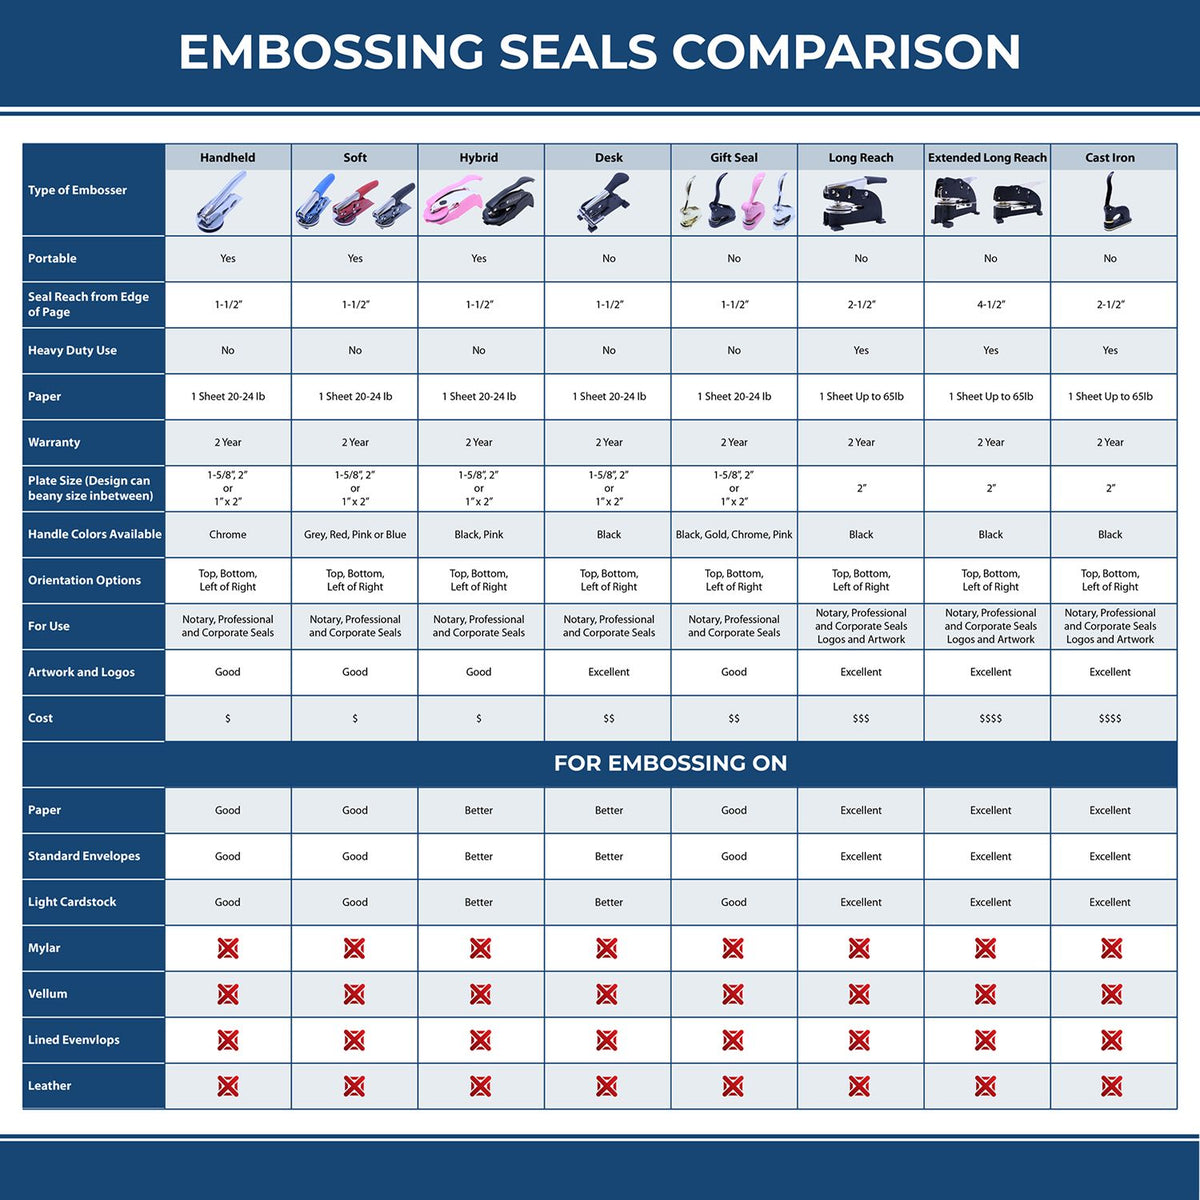 A comparison chart for the different types of mount models available for the Gift Michigan Land Surveyor Seal